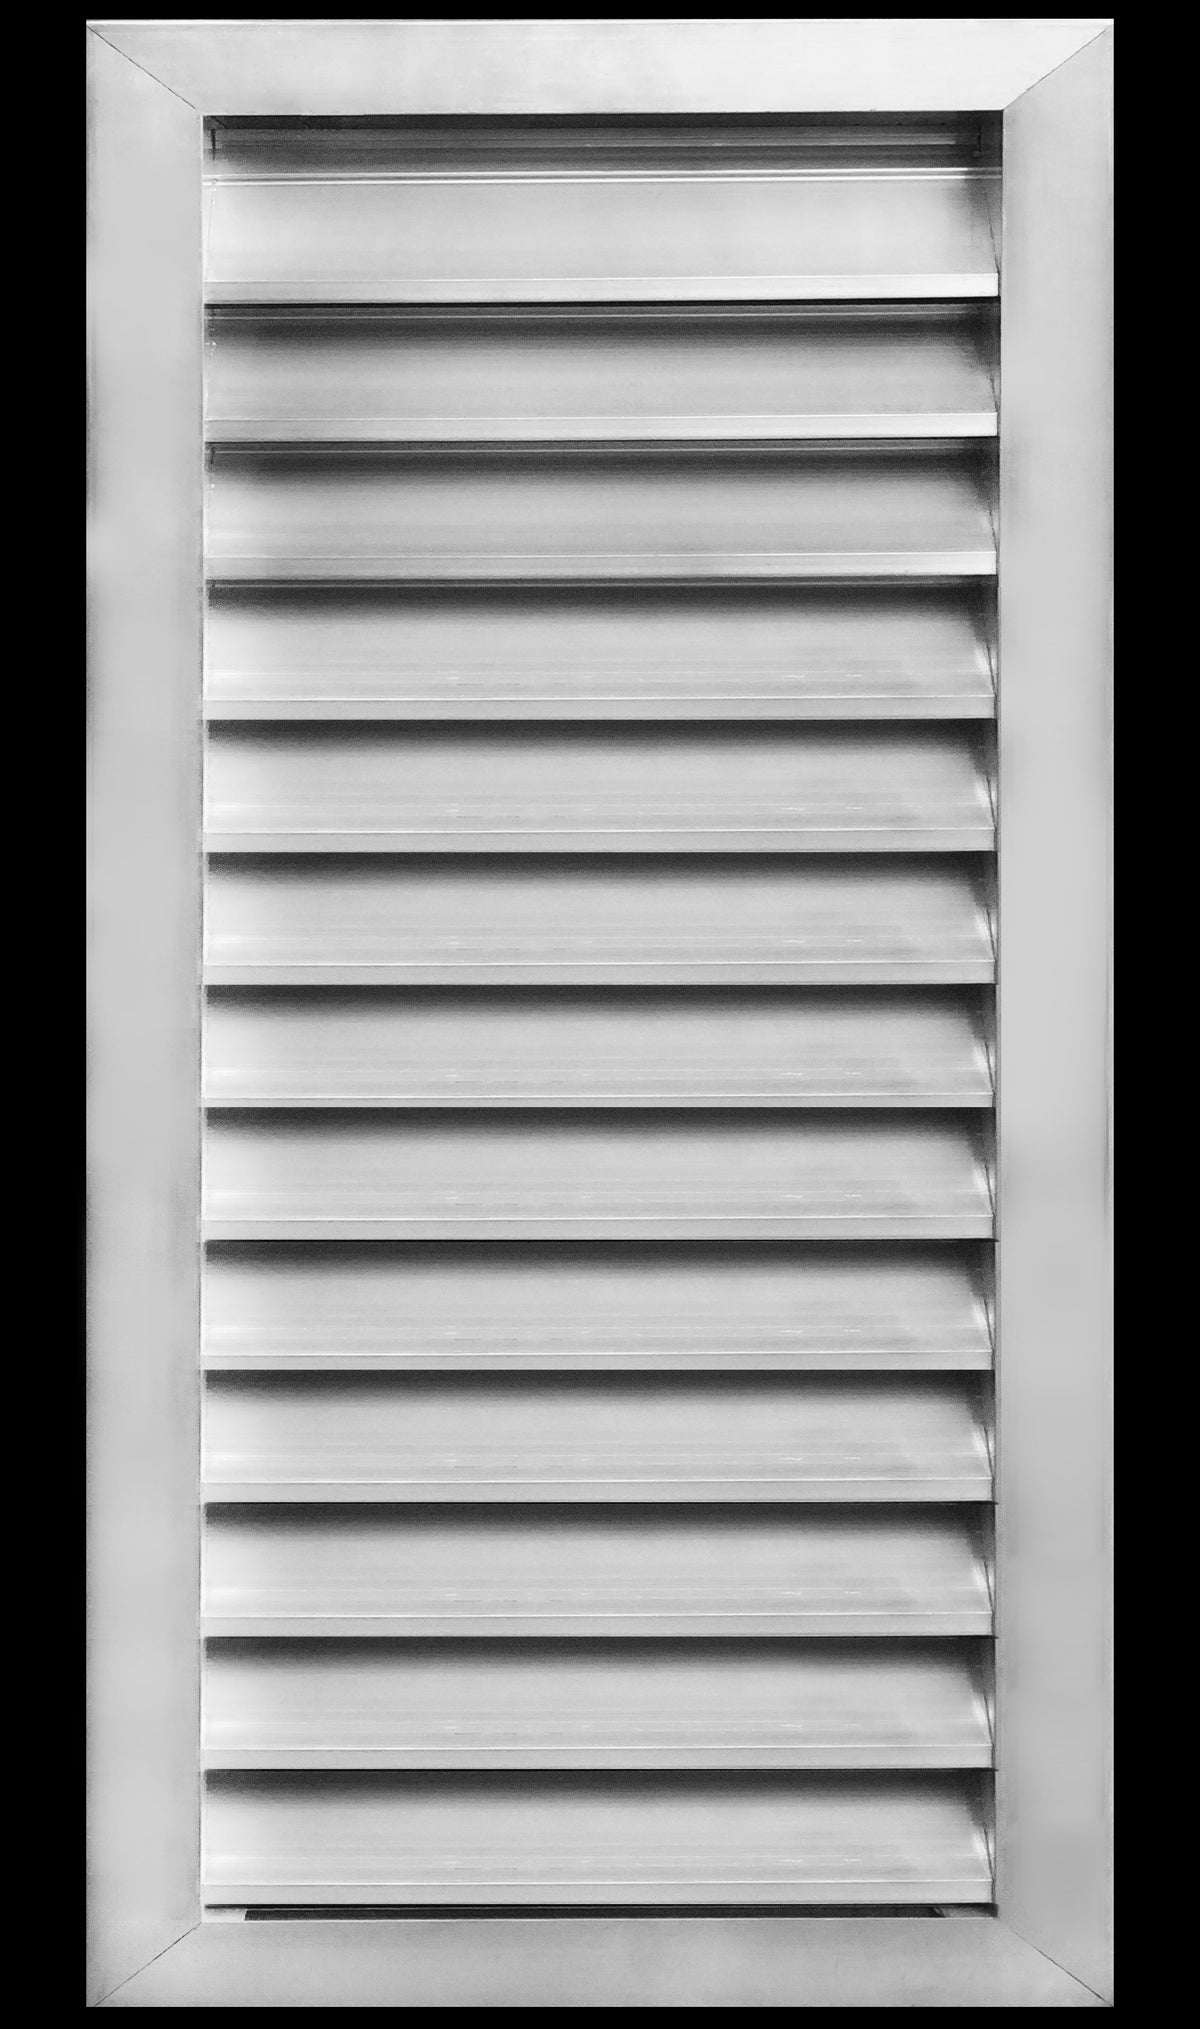 14&quot;w X 28&quot;h Aluminum Outdoor Weather Proof Louvers - Rain &amp; Waterproof Air Vent With Screen Mesh